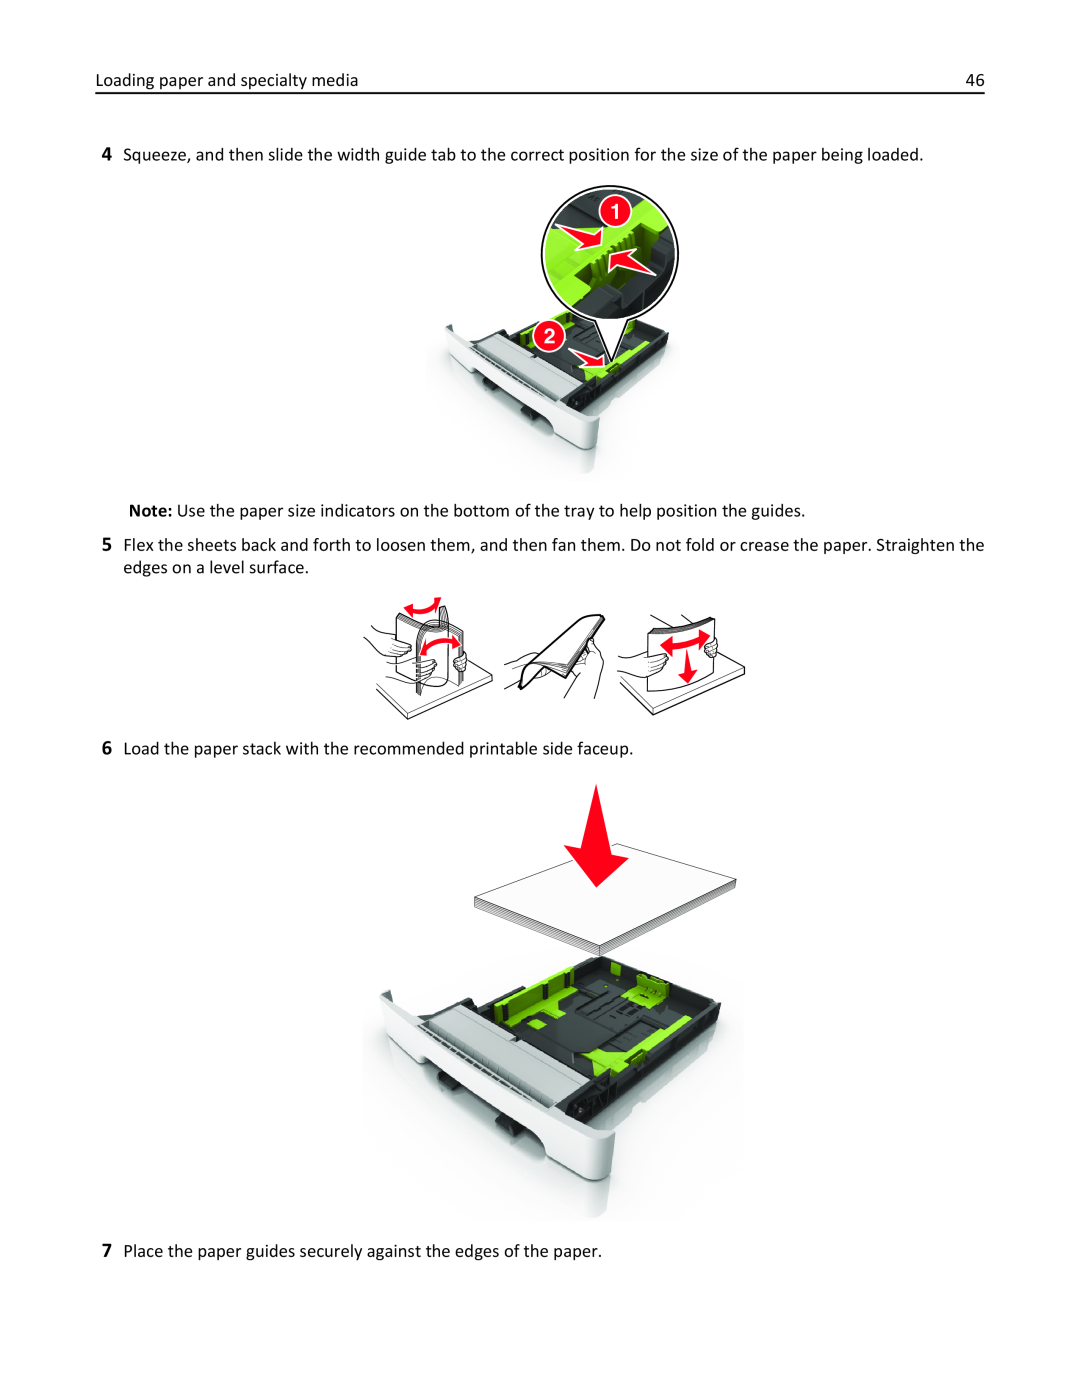 Lexmark 436 manual Loading paper and specialty media, Load the paper stack with the recommended printable side faceup 